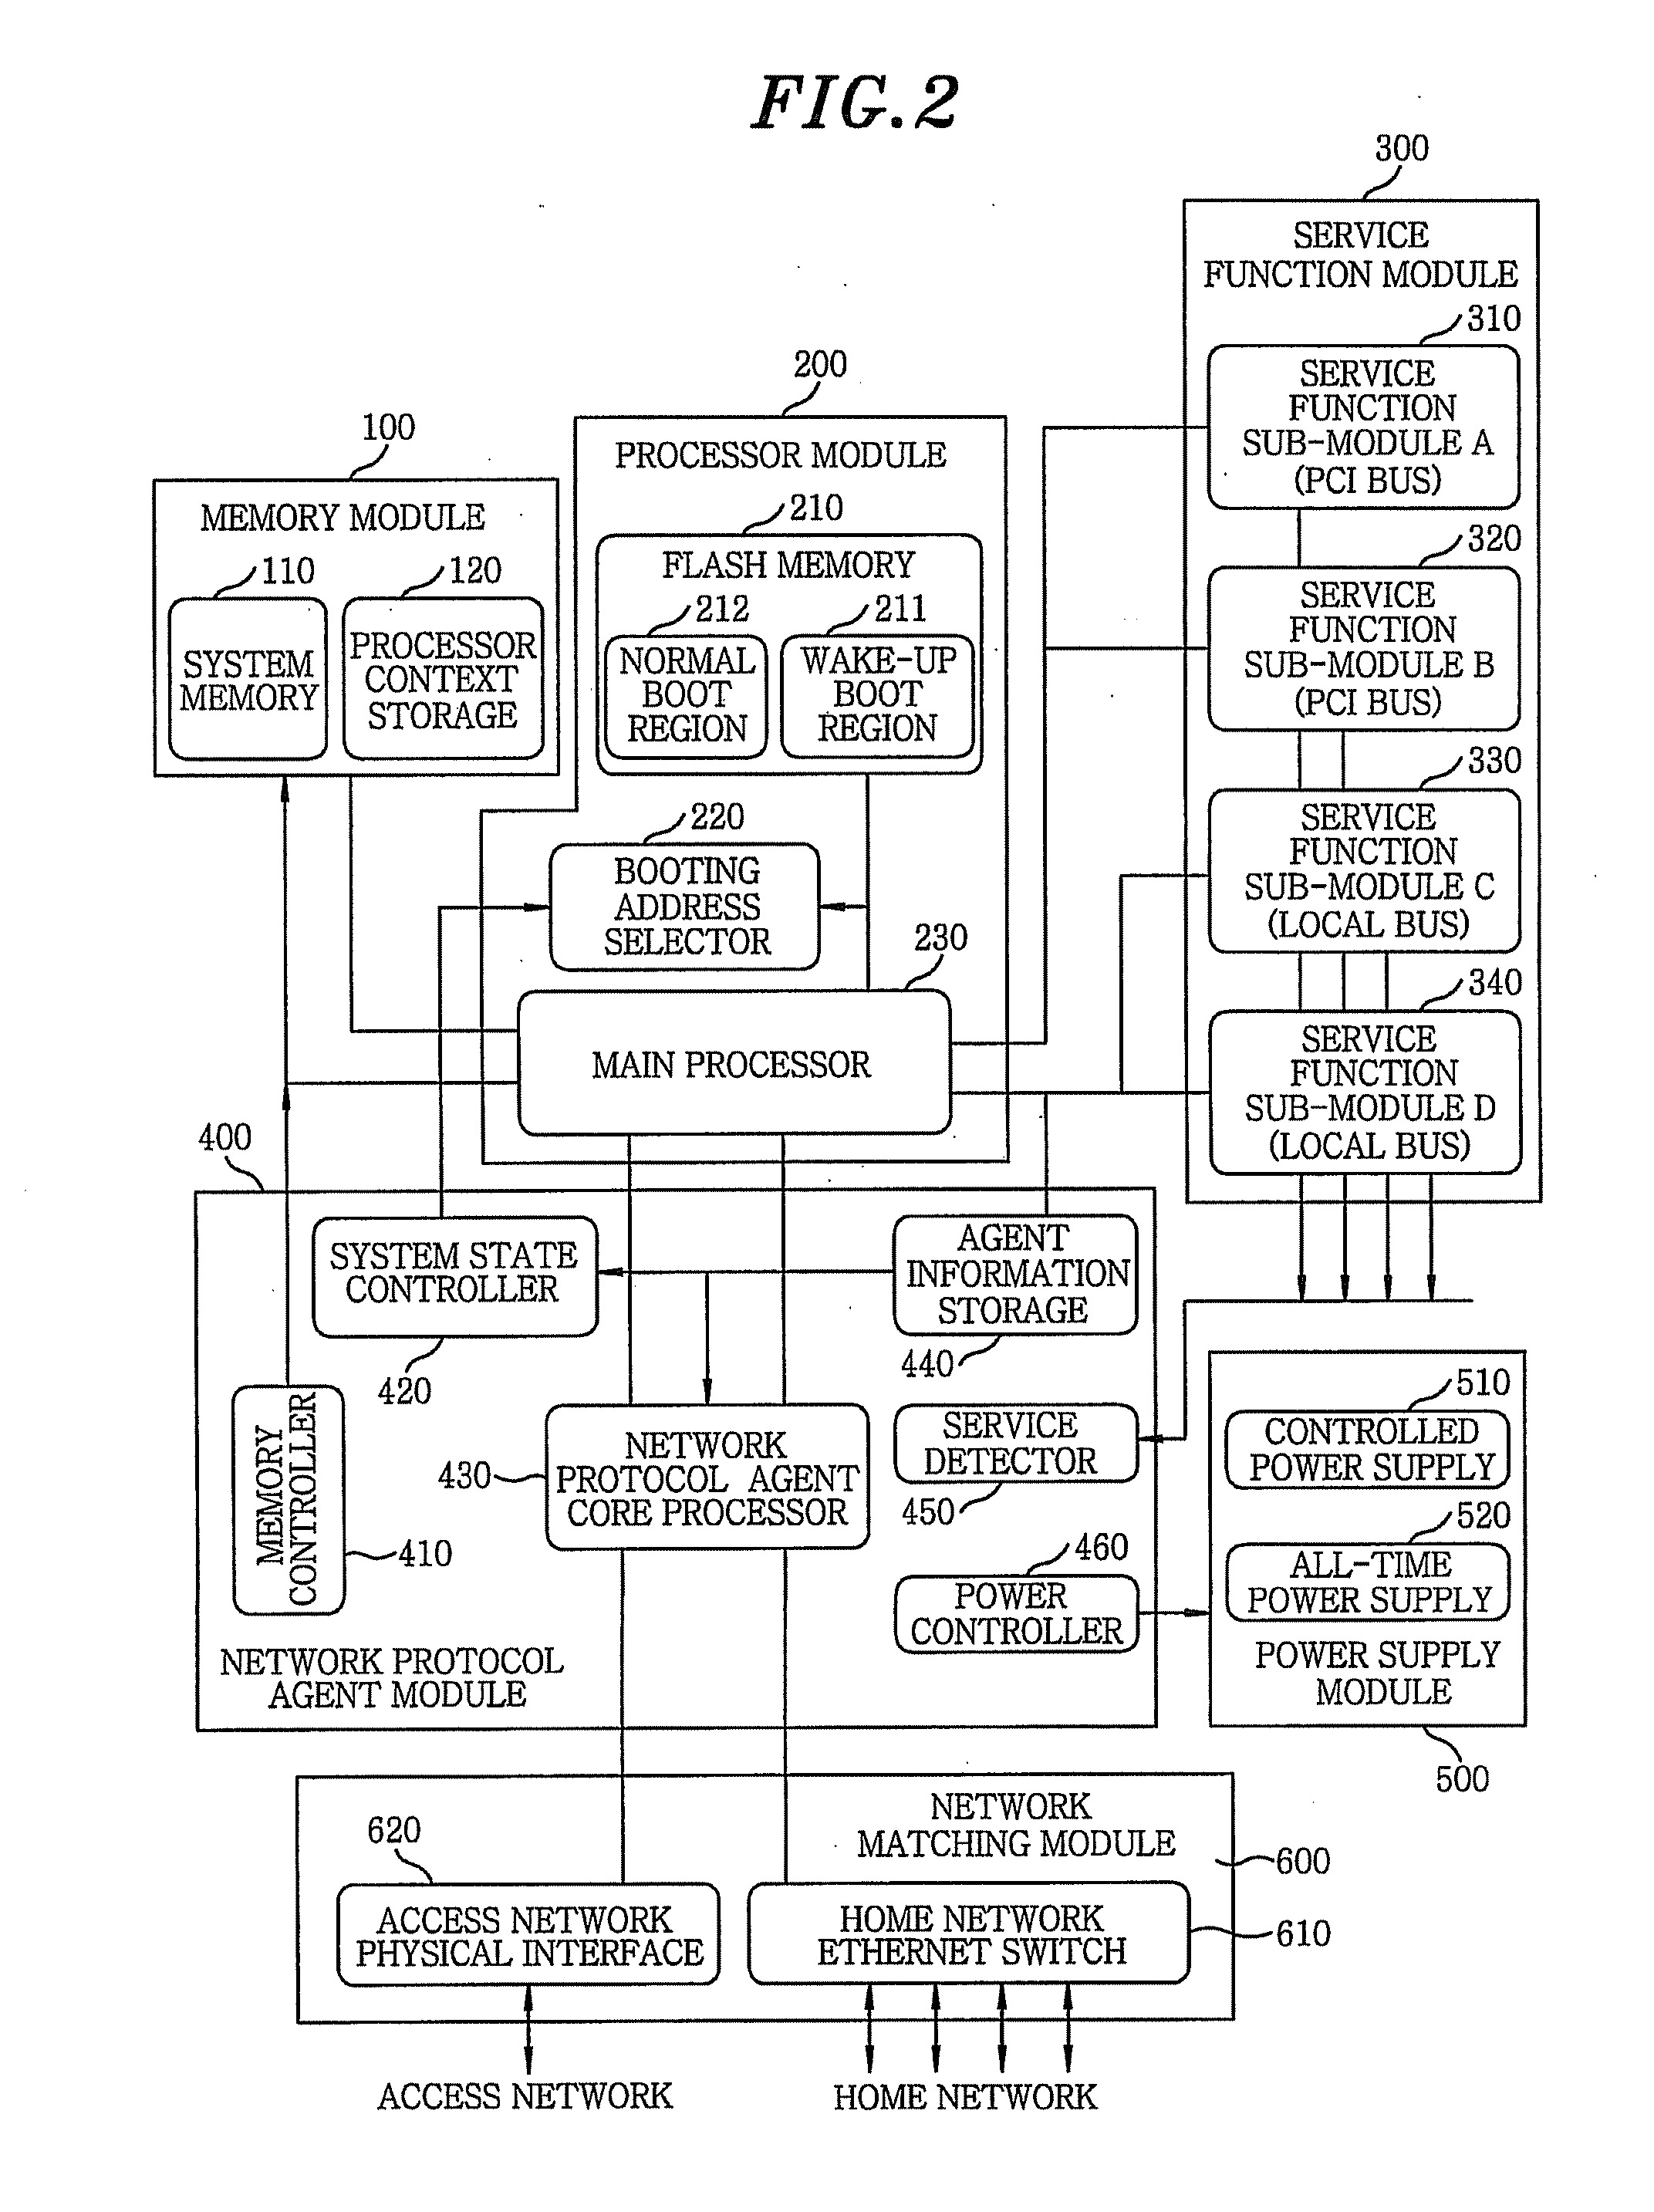 Apparatus and control method for energy-aware home gateway based on network